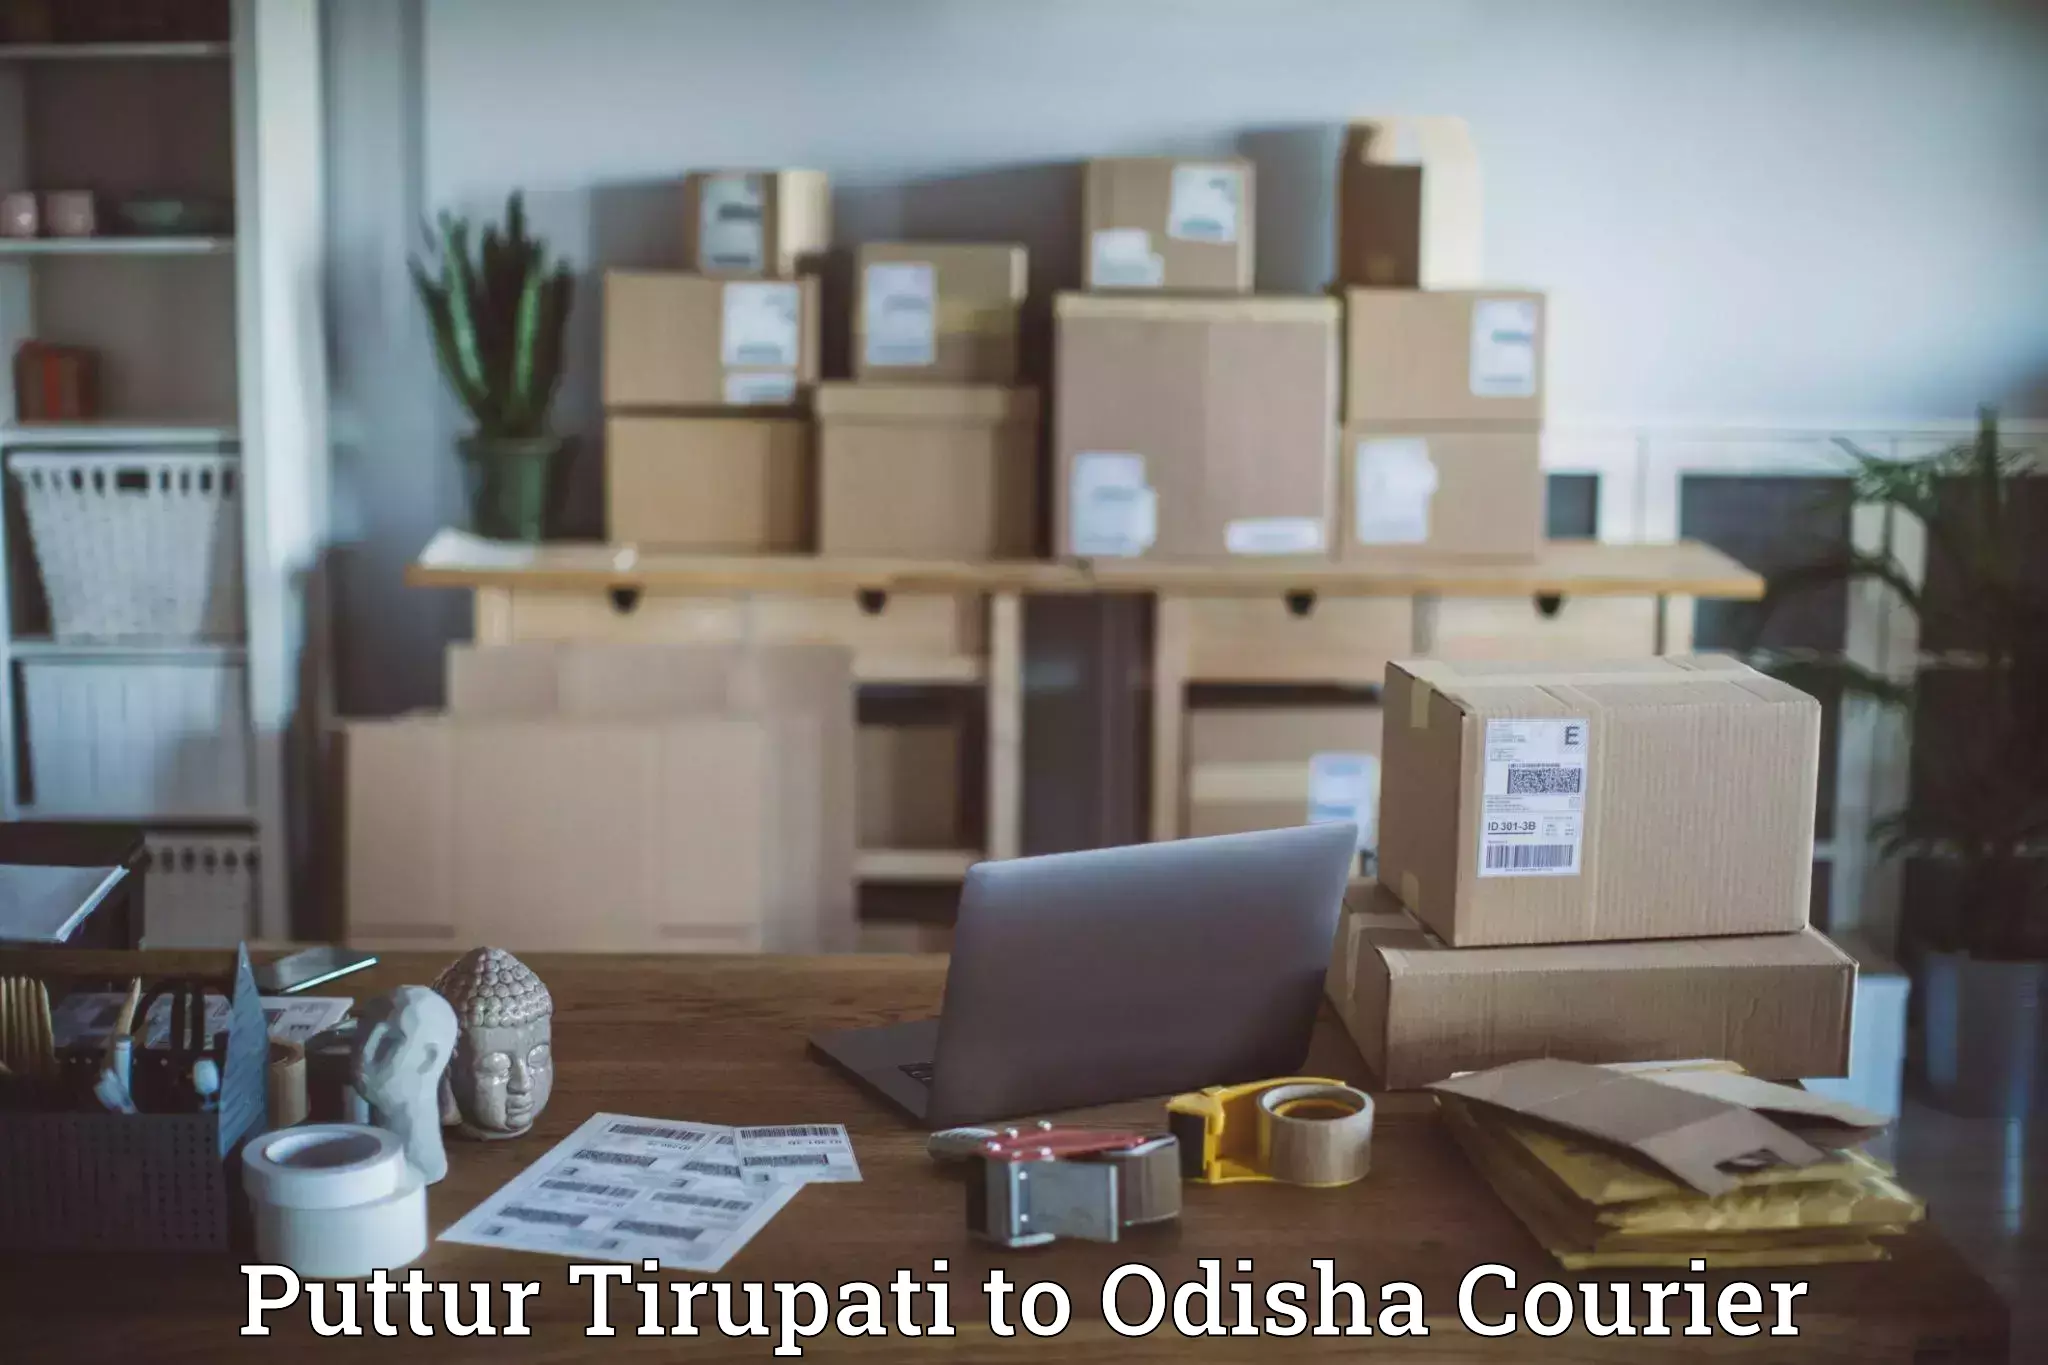 Nationwide shipping coverage Puttur Tirupati to Boudh